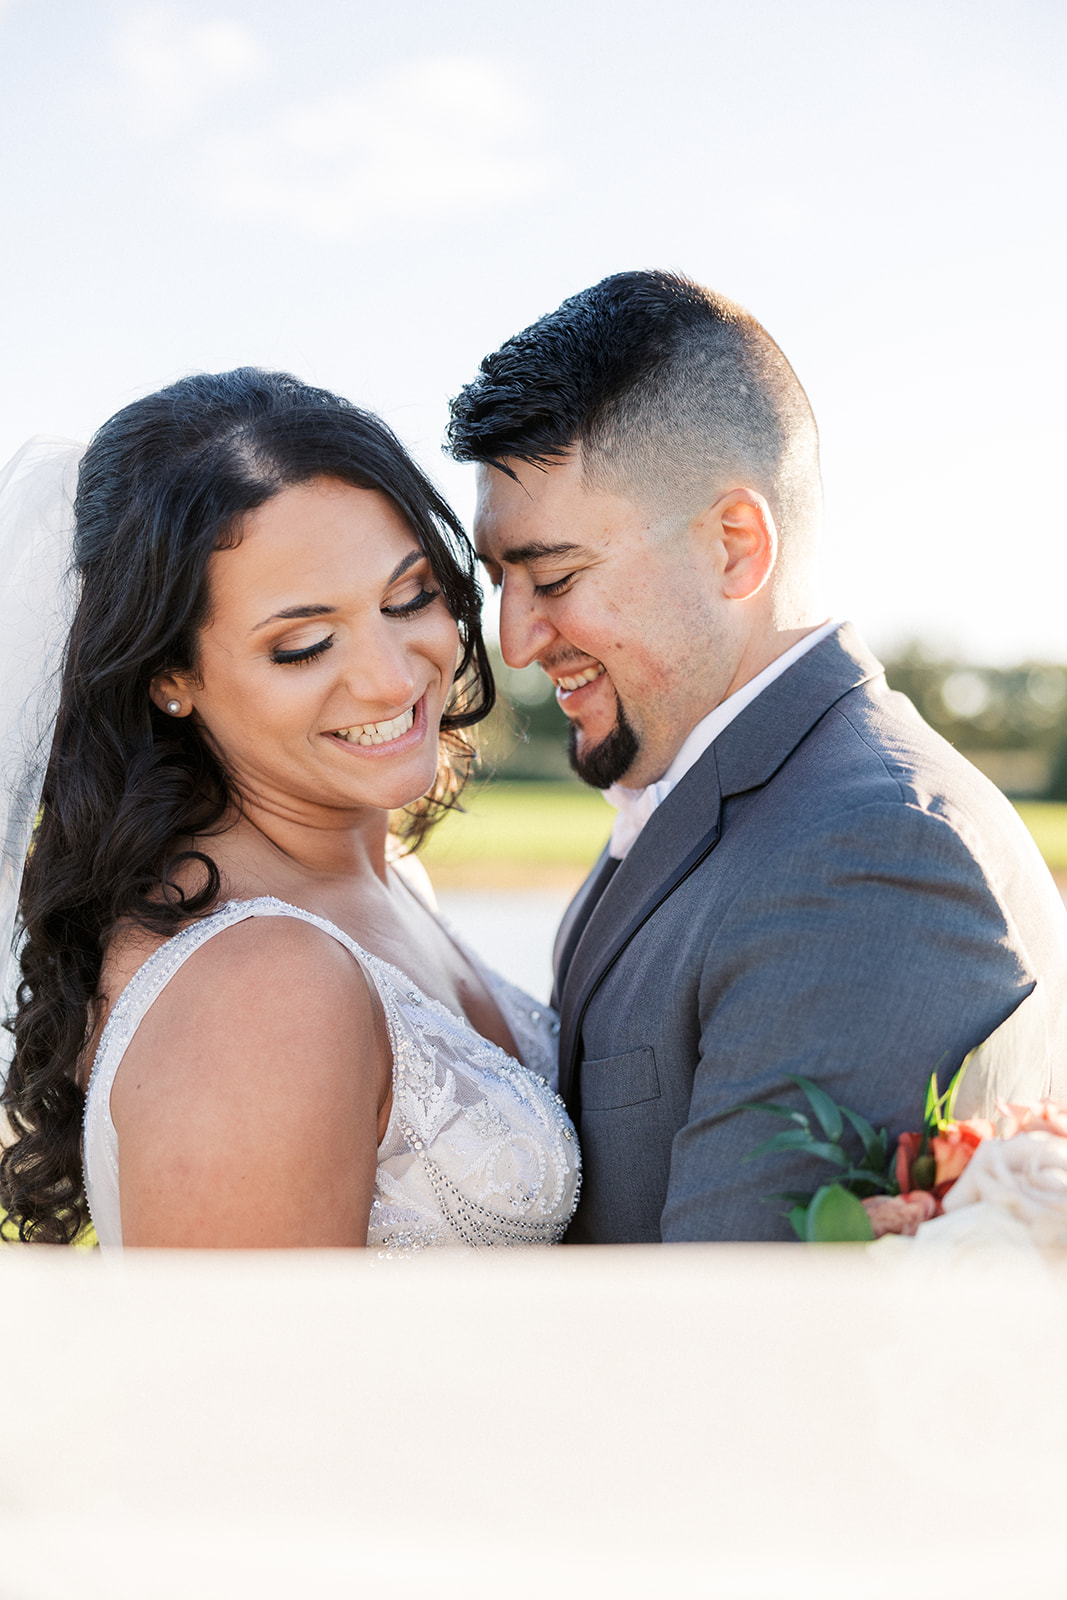 Newlyweds dance together on a green lawn at a Brooklake Country Club Wedding